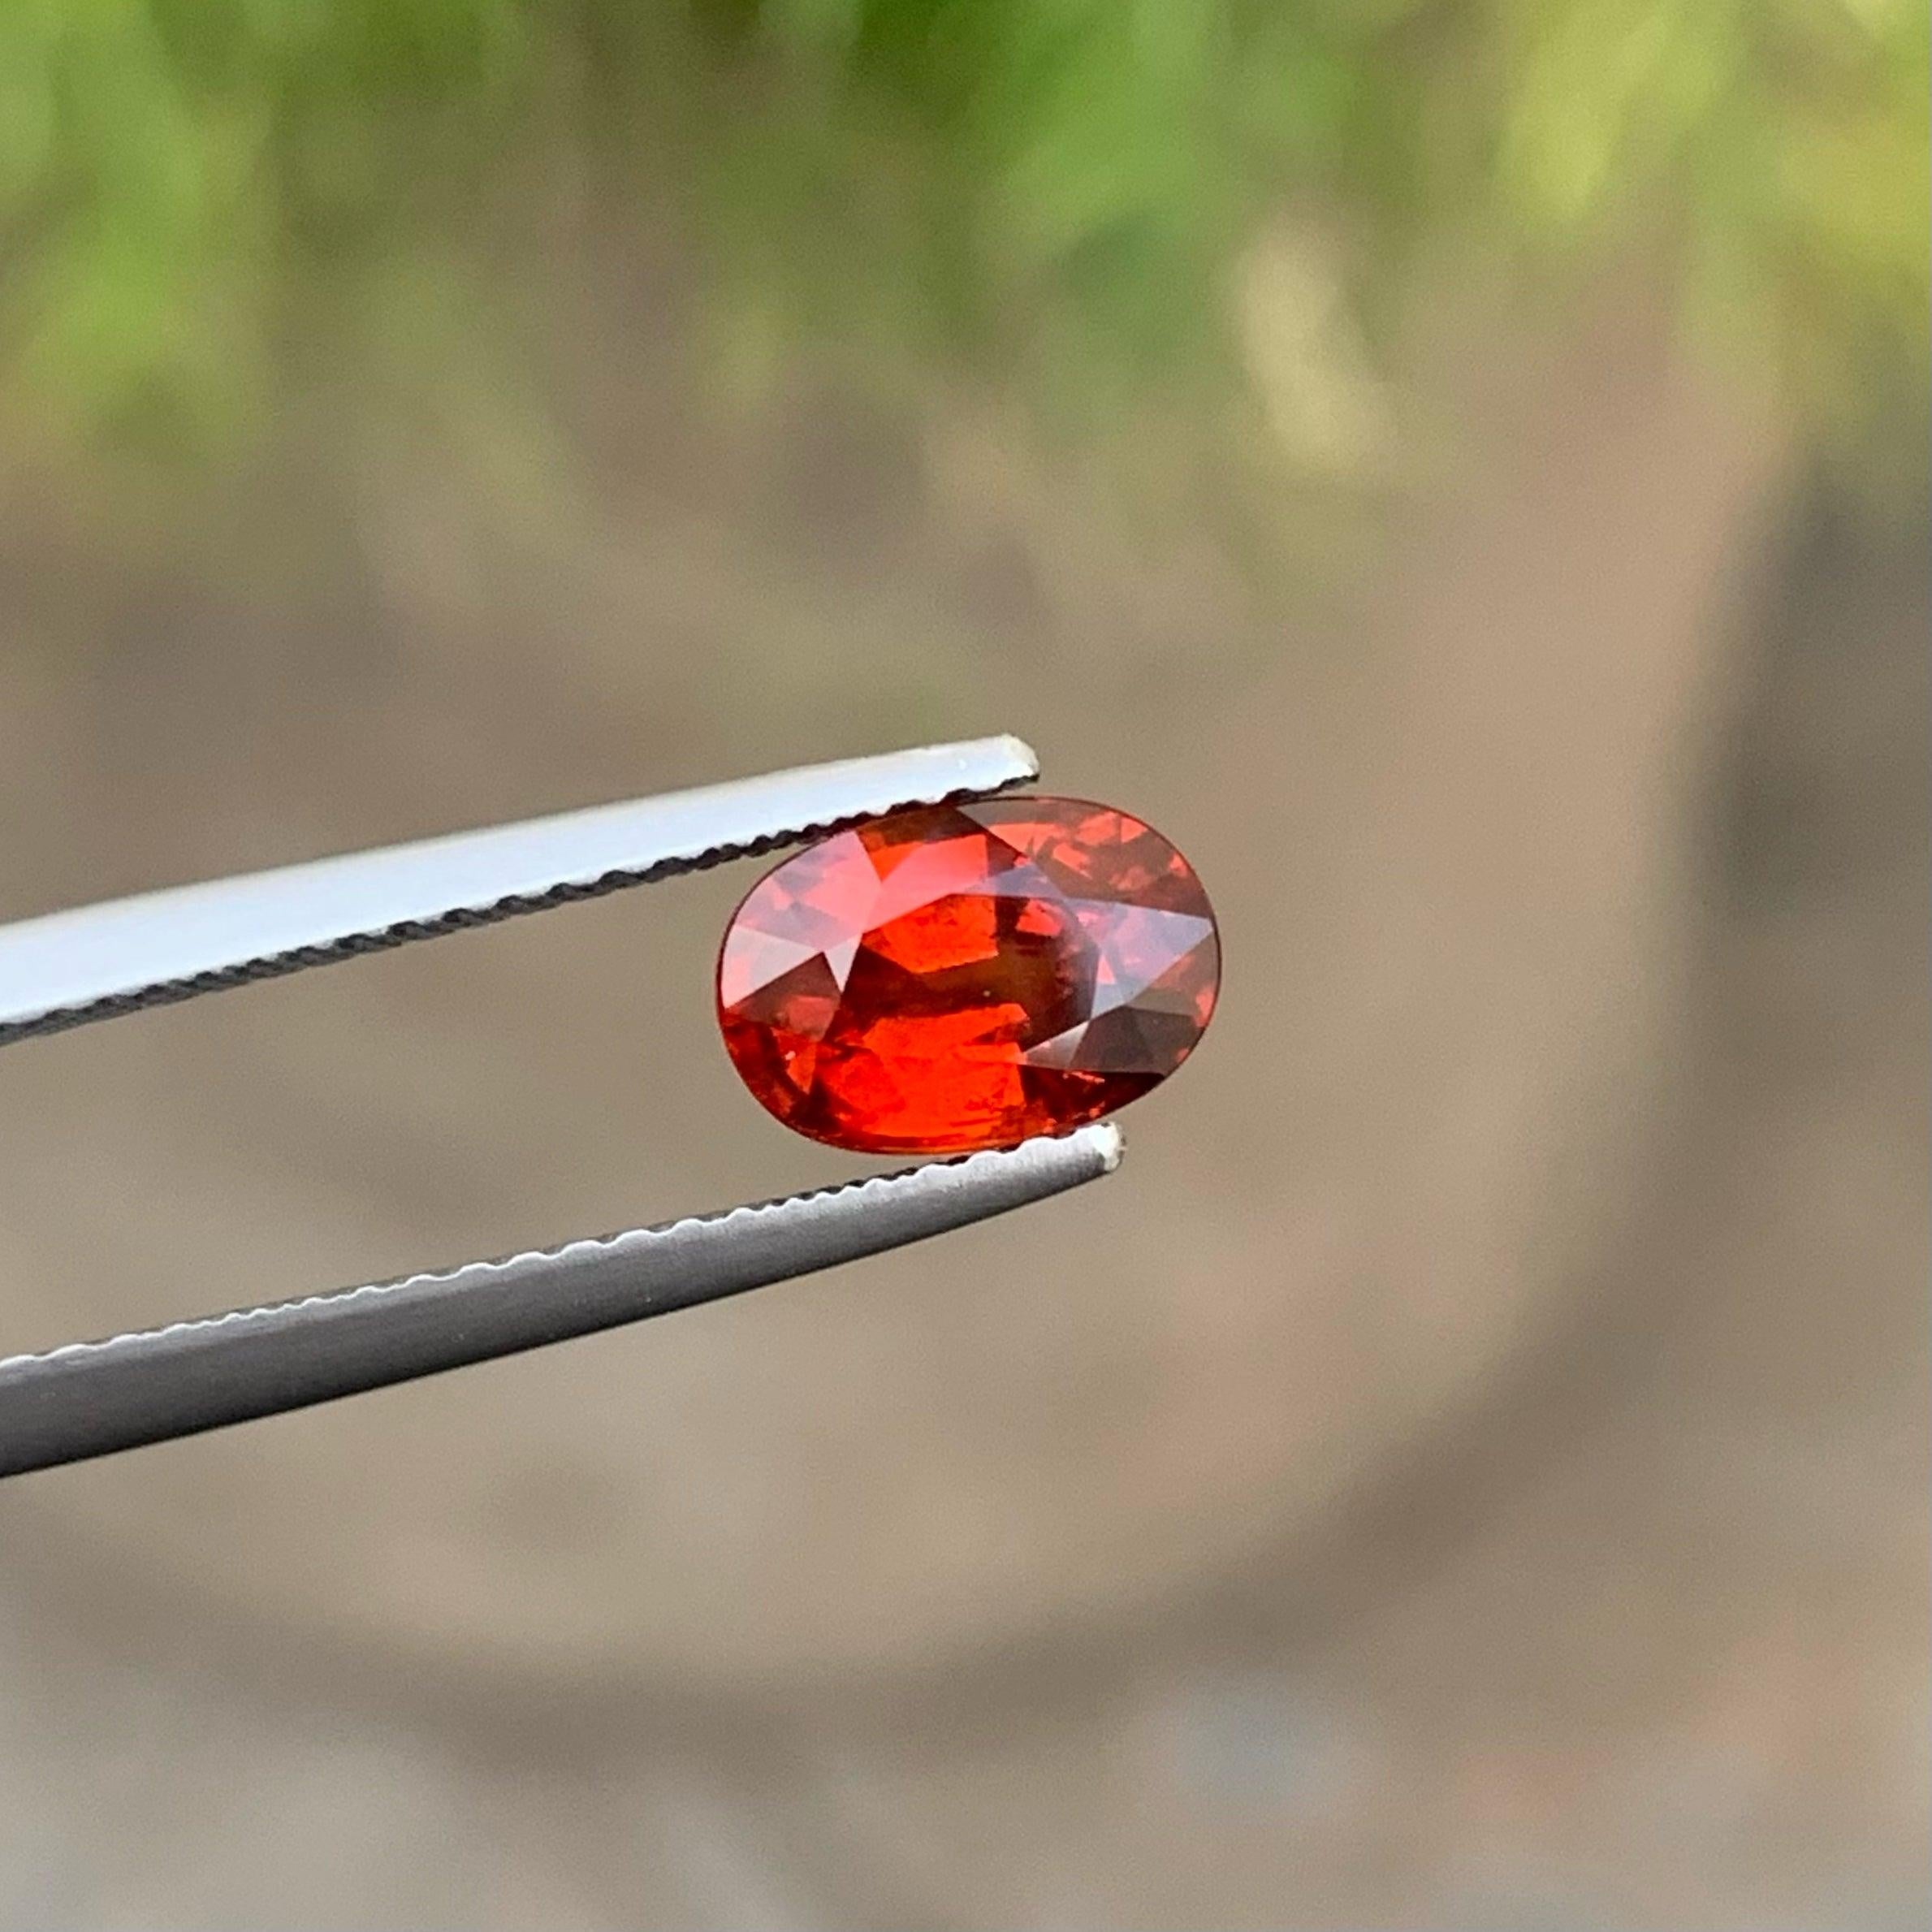 Natural Spessartite Loose Garnet Gemstone of 1.65 carats from Namibia has a wonderful cut in a Oval shape, incredible Red color, Great brilliance. This gem is VS Clarity.

Product Information:
GEMSTONE NAME: Natural Spessartite Loose Garnet